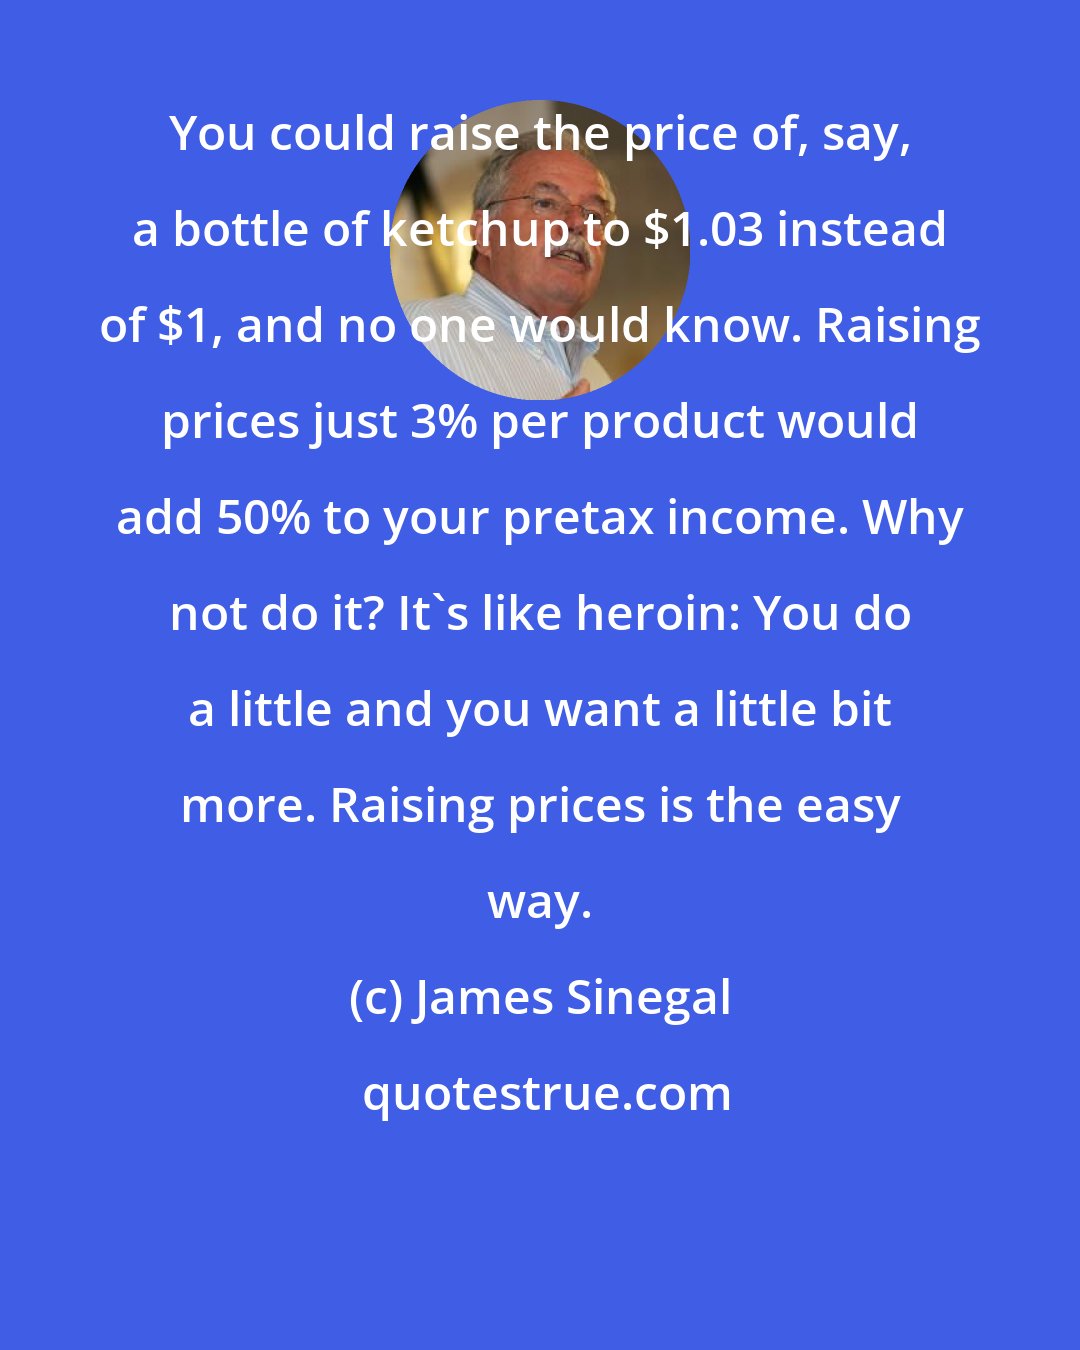 James Sinegal: You could raise the price of, say, a bottle of ketchup to $1.03 instead of $1, and no one would know. Raising prices just 3% per product would add 50% to your pretax income. Why not do it? It's like heroin: You do a little and you want a little bit more. Raising prices is the easy way.